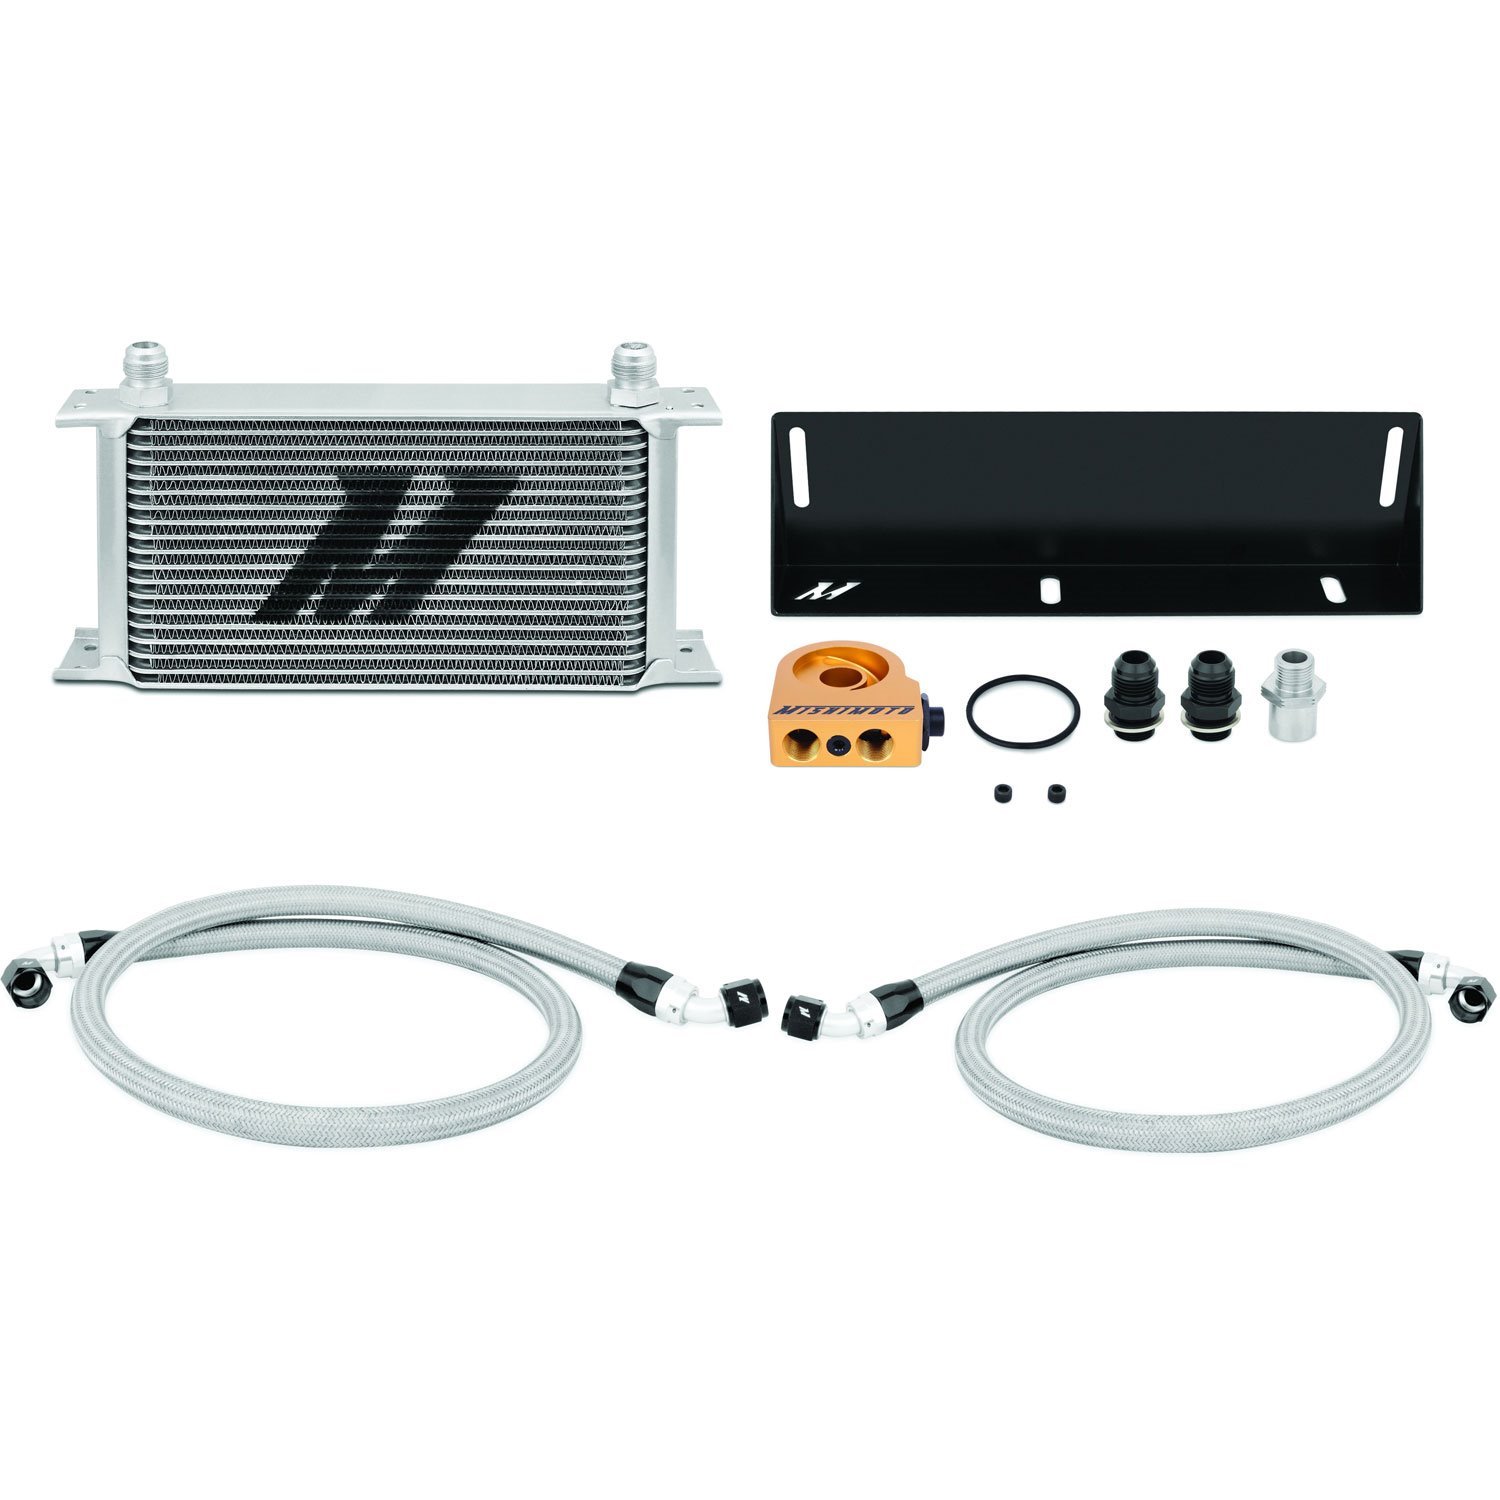 Ford Mustang 5.0L Thermostatic Oil Cooler Kit - MFG Part No. MMOC-MUS-79T